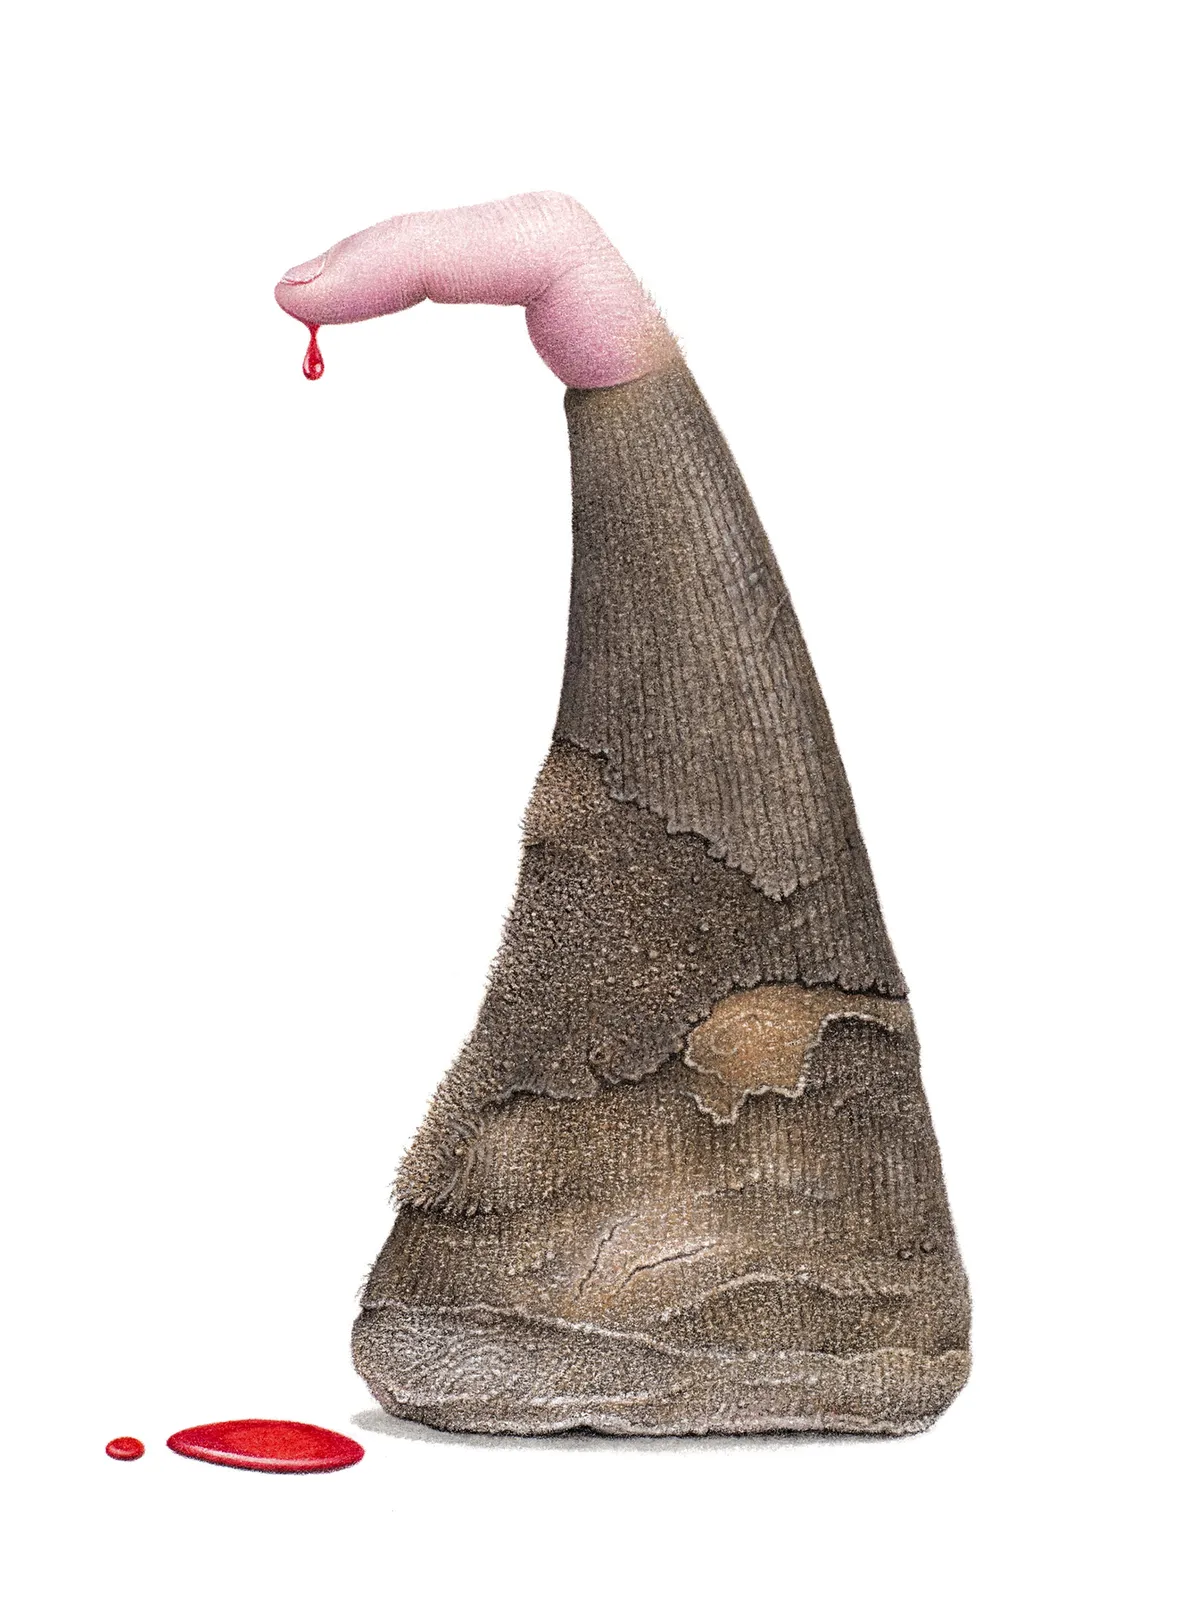 'Keratin'. Drawing of a rhino horn with a bloody human finger. © mART